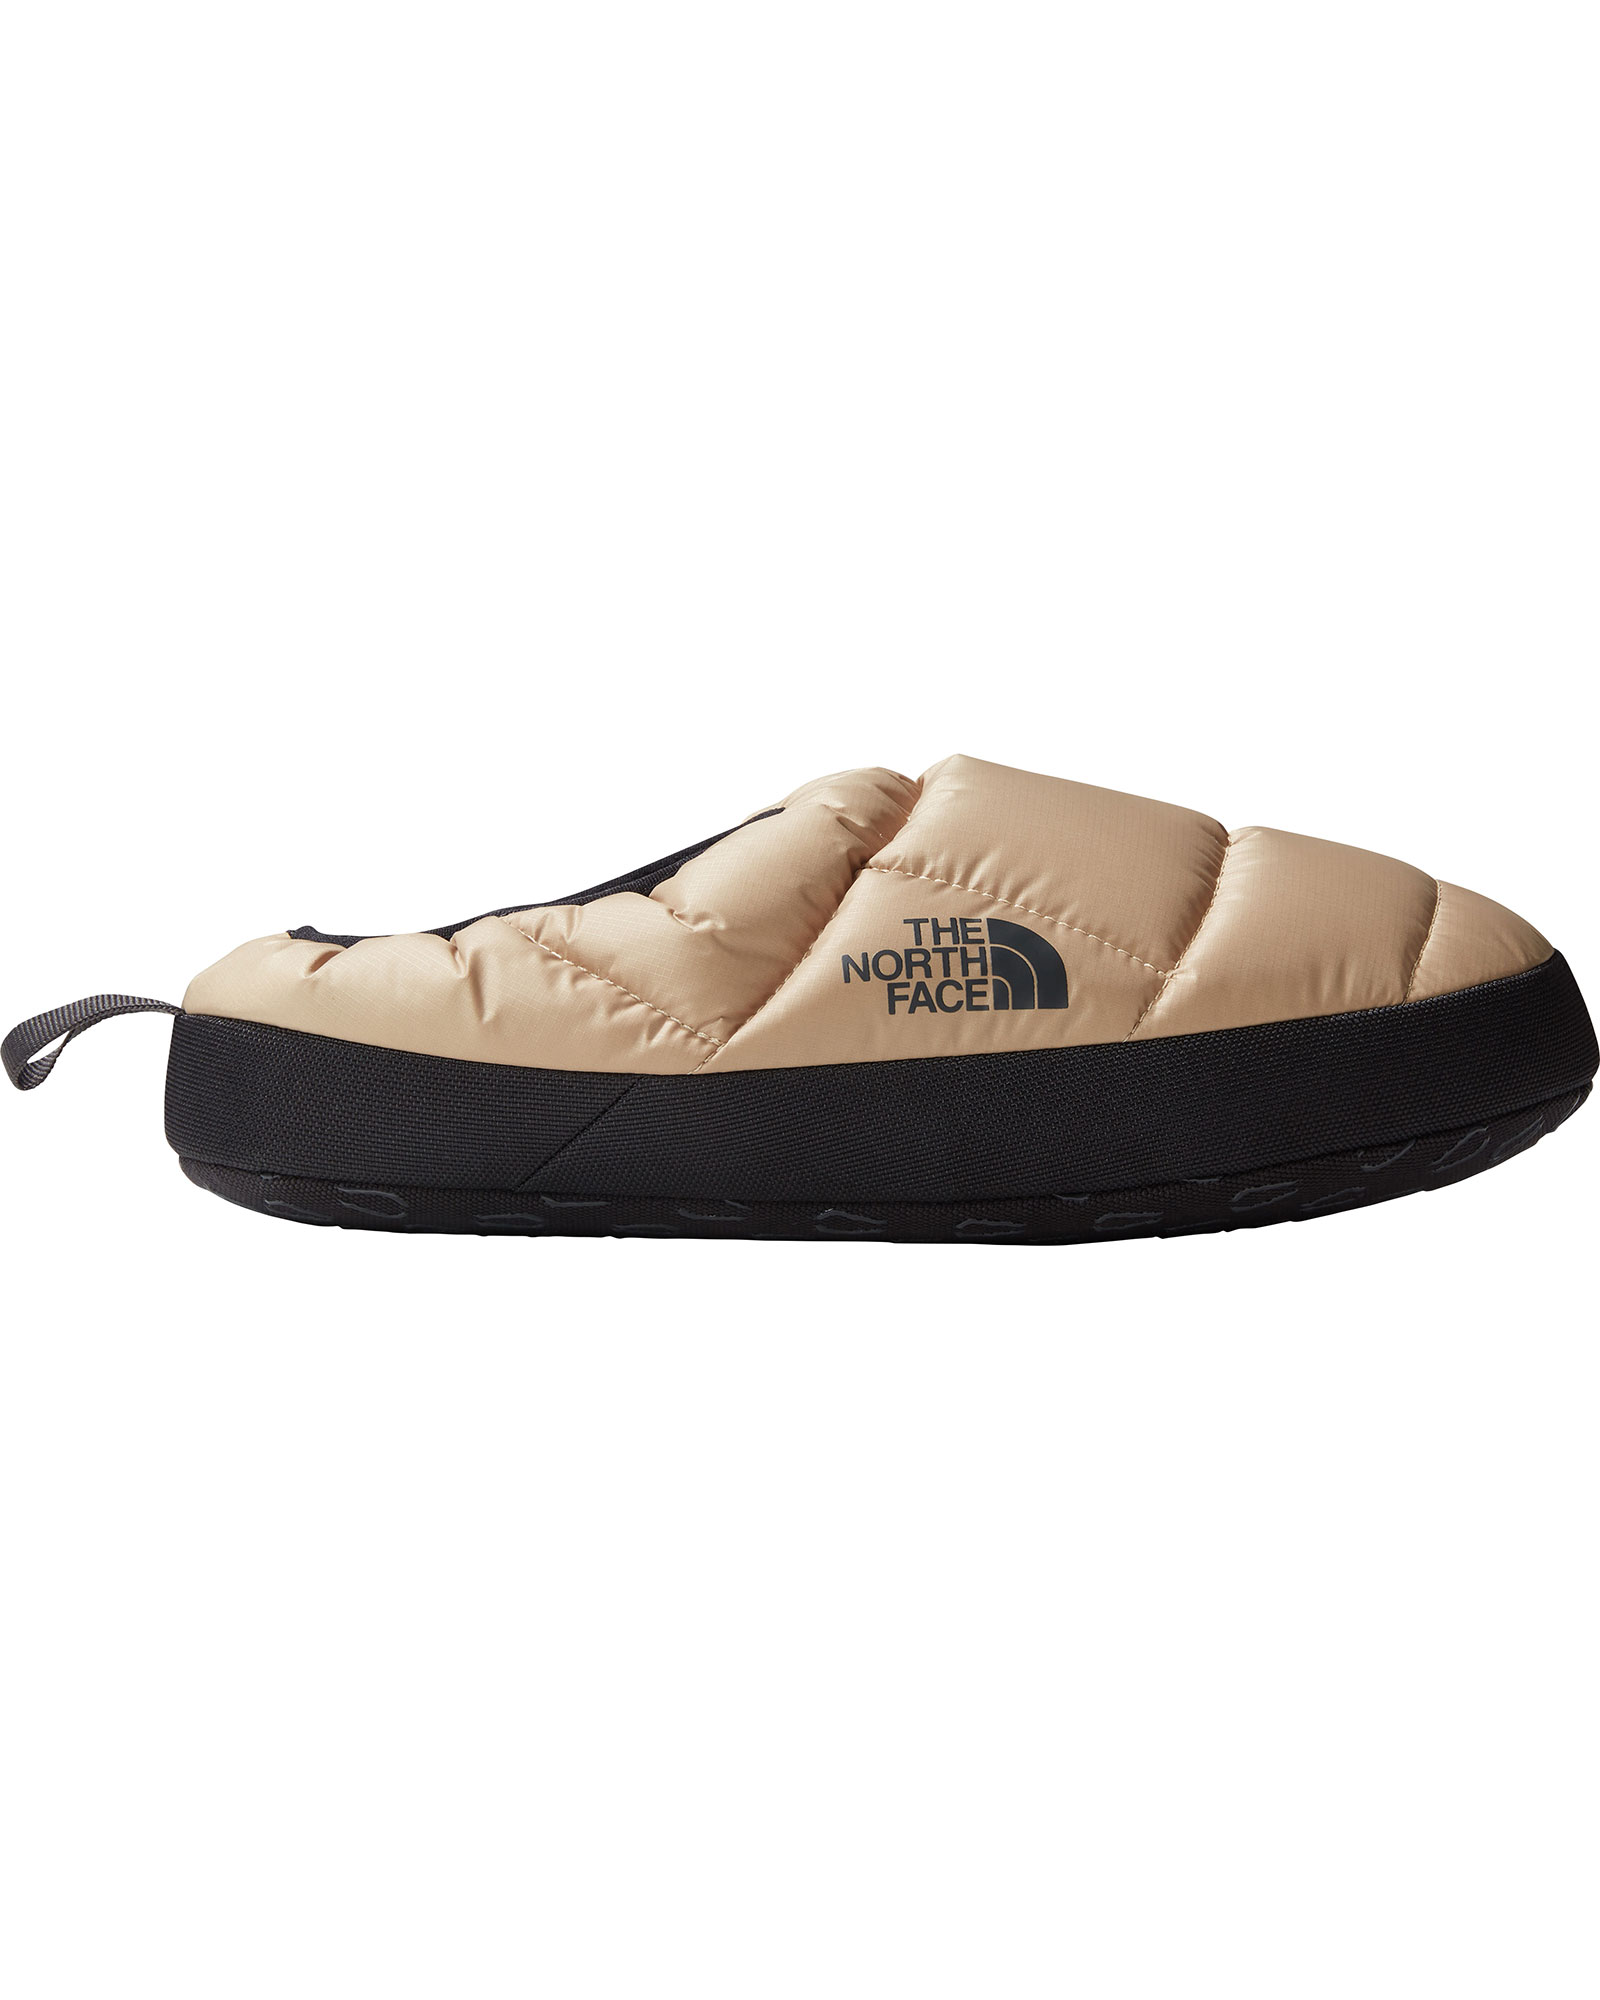 The North Face Men’s ThermoBall NSE Mules III - Khaki Stone/TNF Black L